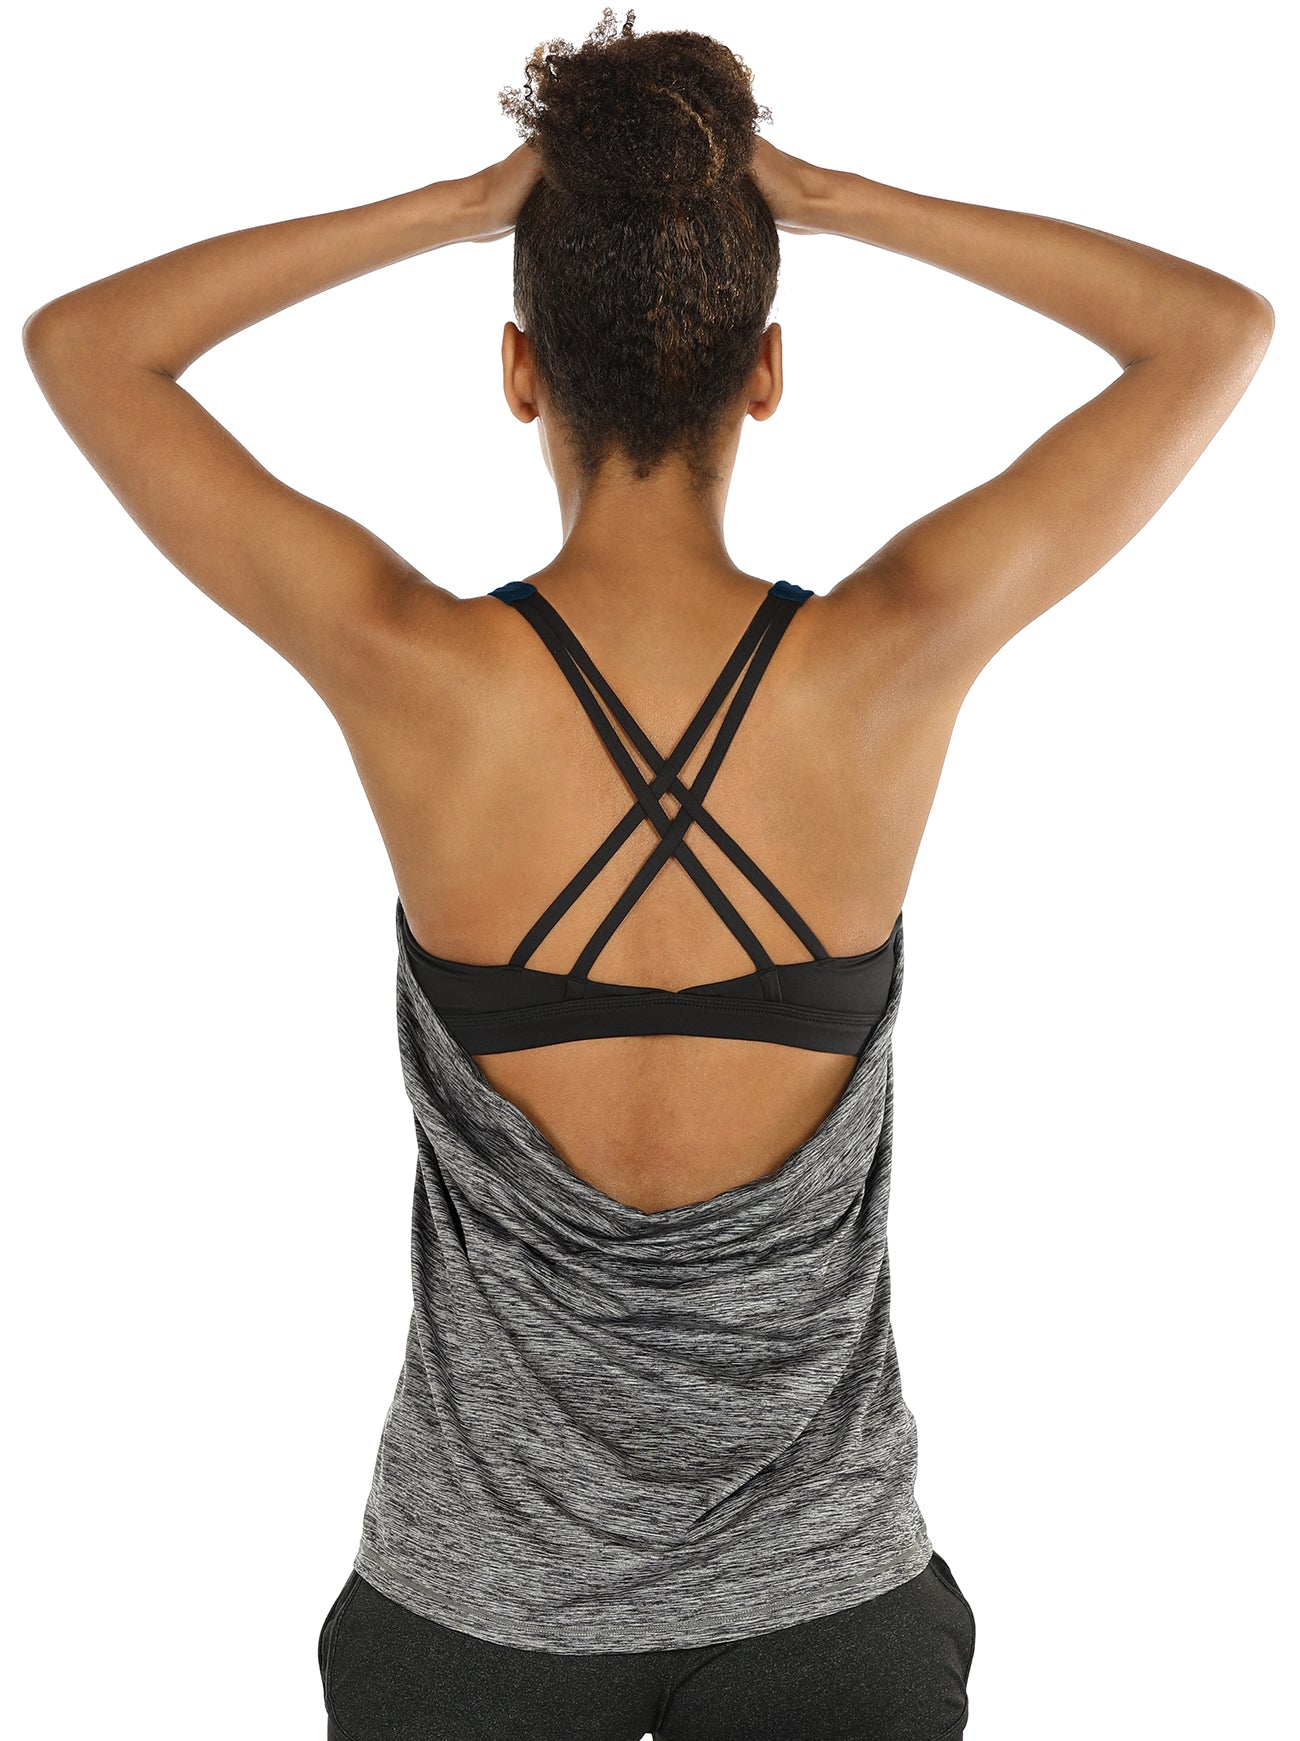 icyzone Workout Tank Tops for Women - Racerback Athletic Yoga Tops, Running  Exercise Gym Shirts(Pack of 3)(Black/Cream White/Brick, XS) at   Women's Clothing store